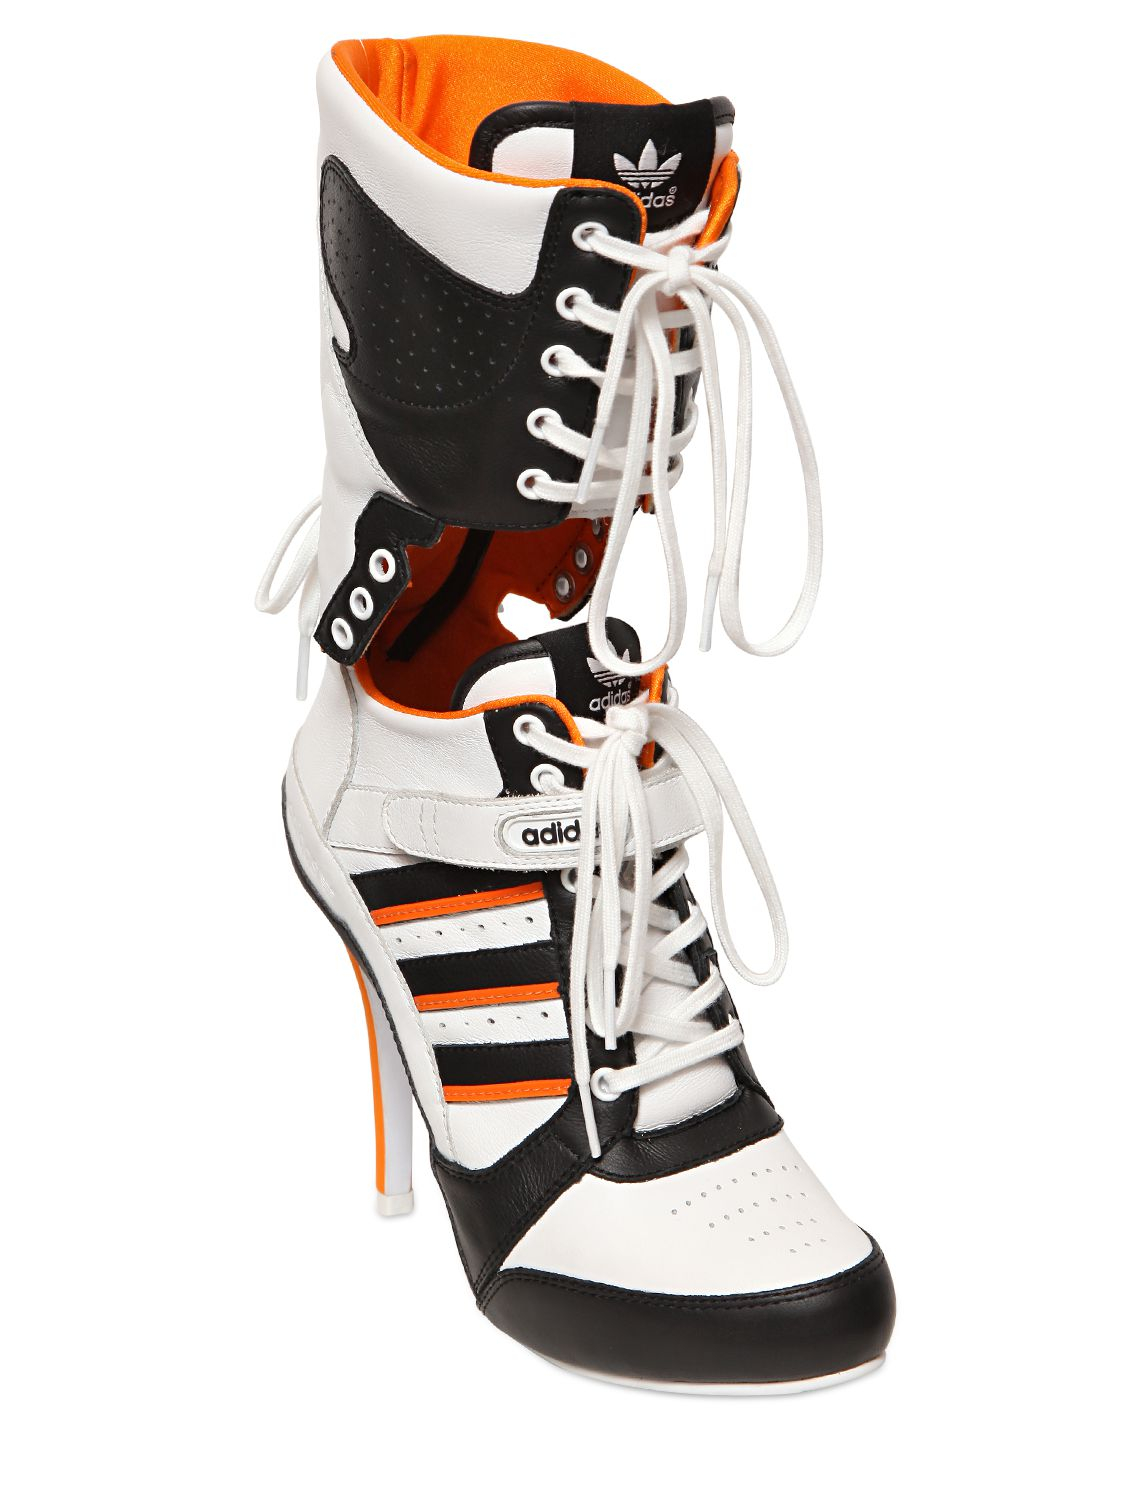 Jeremy Scott for adidas 130mm Js High Heel Leather Boots in Orange - Lyst